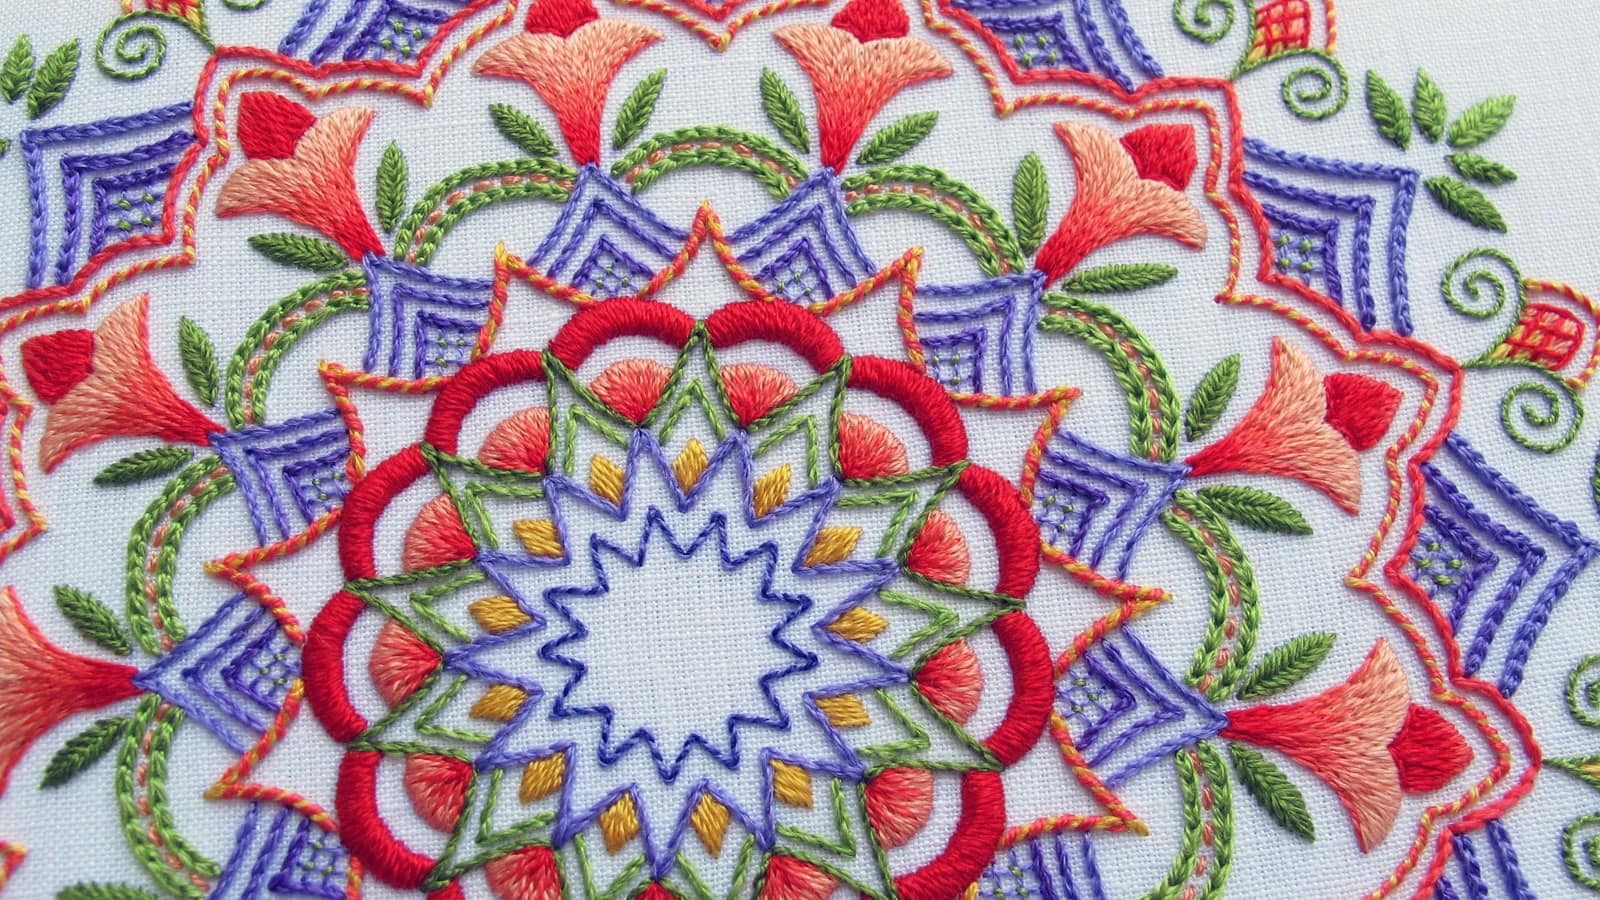 Bead Embroidery Patterns Free Download Needlenthread Tips Tricks And Great Resources For Hand Embroidery